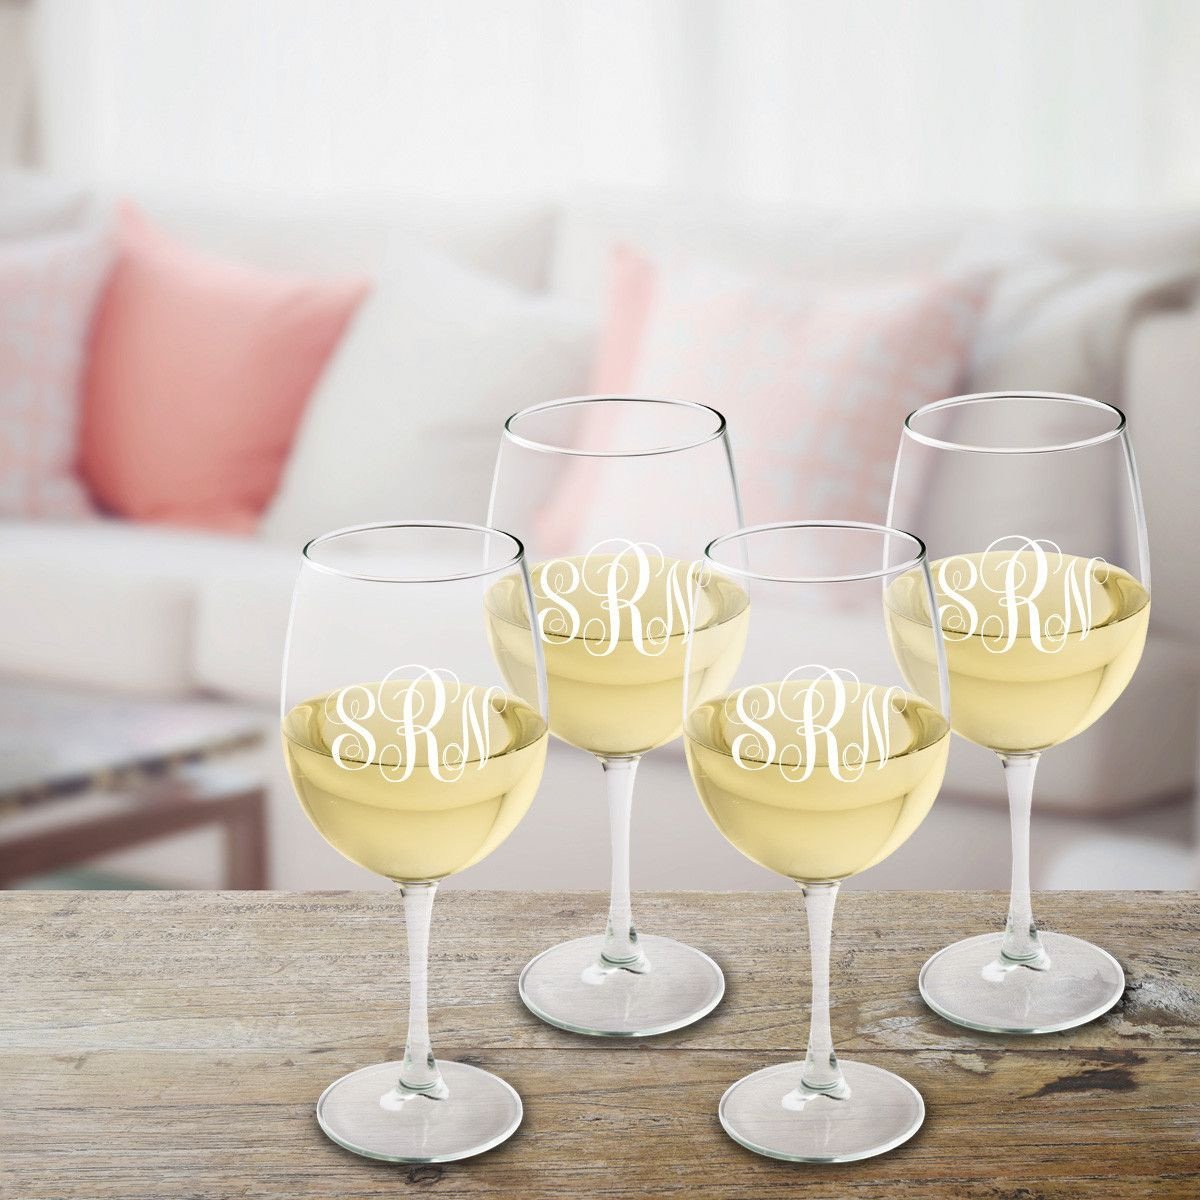 Speaking In Cursive Funny Wine Glass - Best Christmas Wine Gifts for Women,  Mom, Men - Unique Xmas Gag Gifts for Wife, Her - Cool Birthday Present